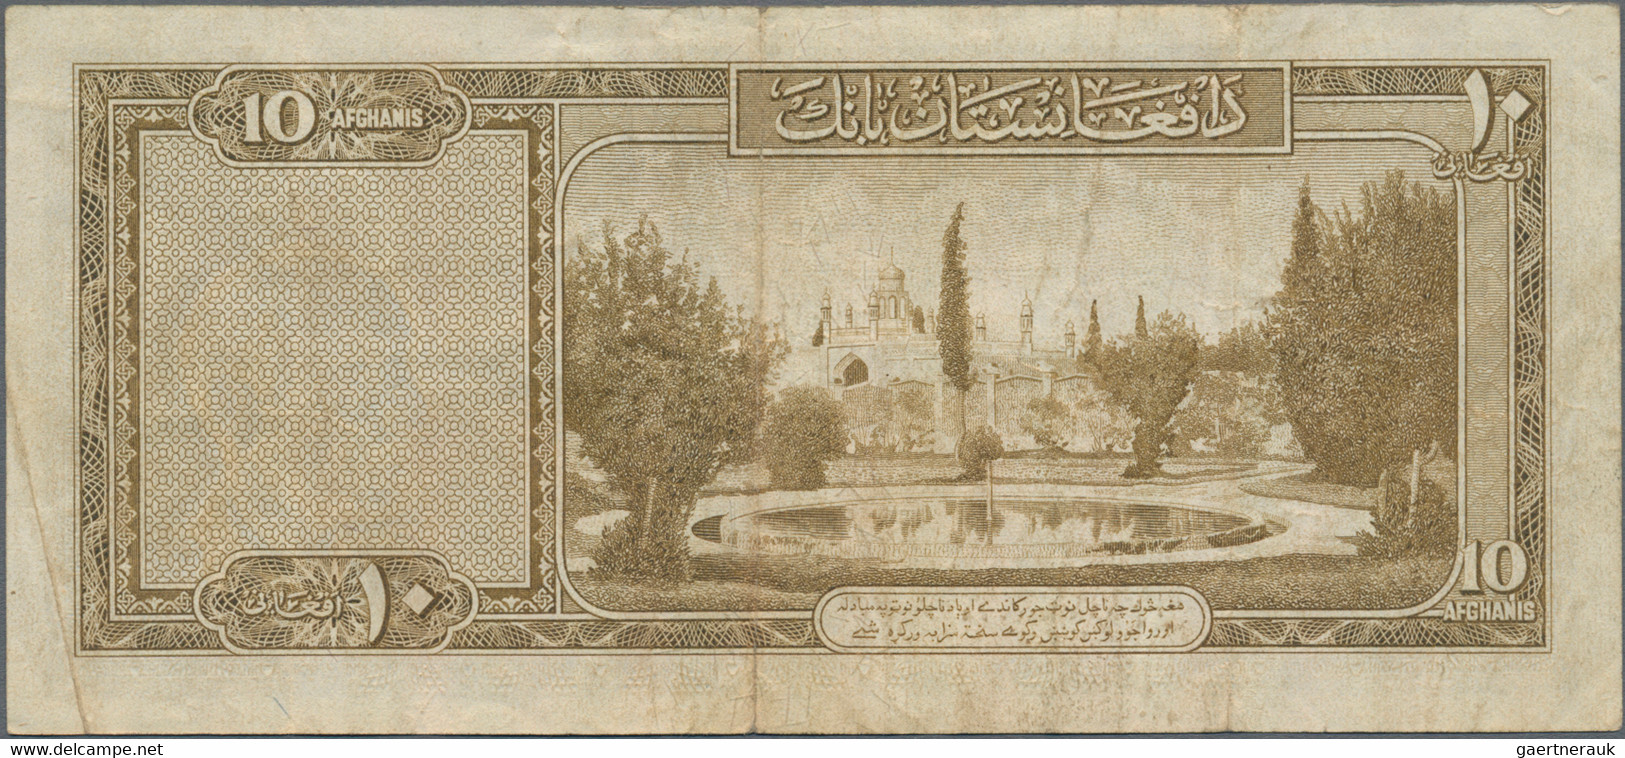 Afghanistan: Set with 11 banknotes of the SH 1327-1336 (1948-1957) "King Muhammad Zahir" Issue, comp